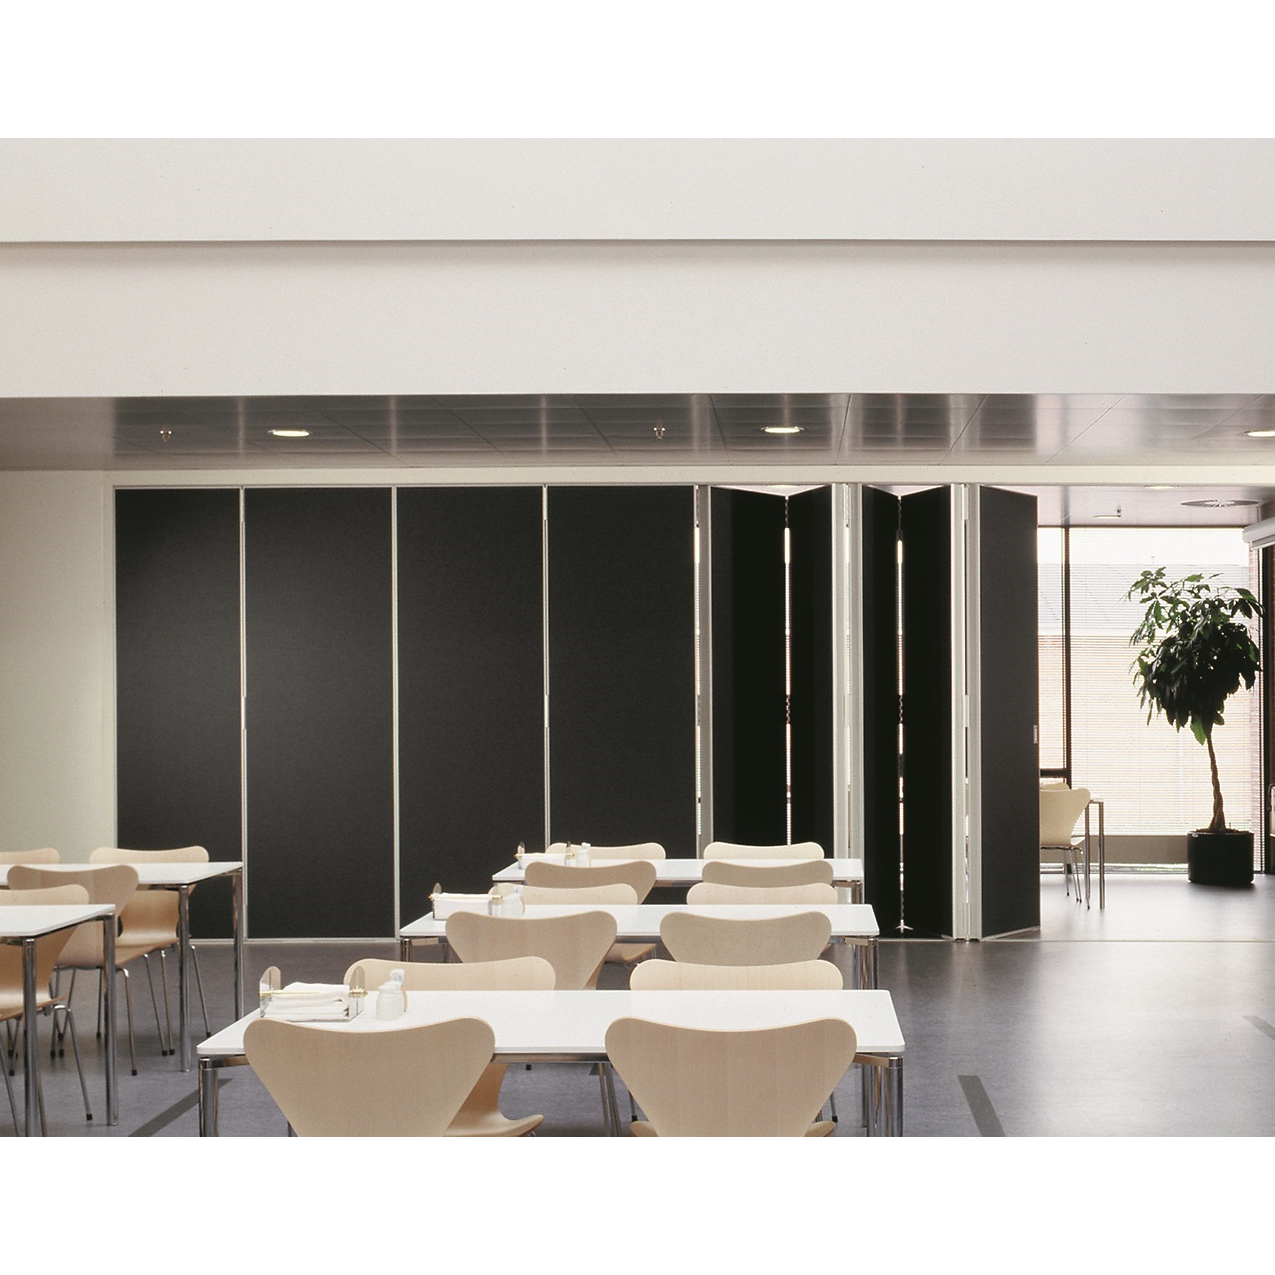 The G200 by Movawall is the chosen product for new office